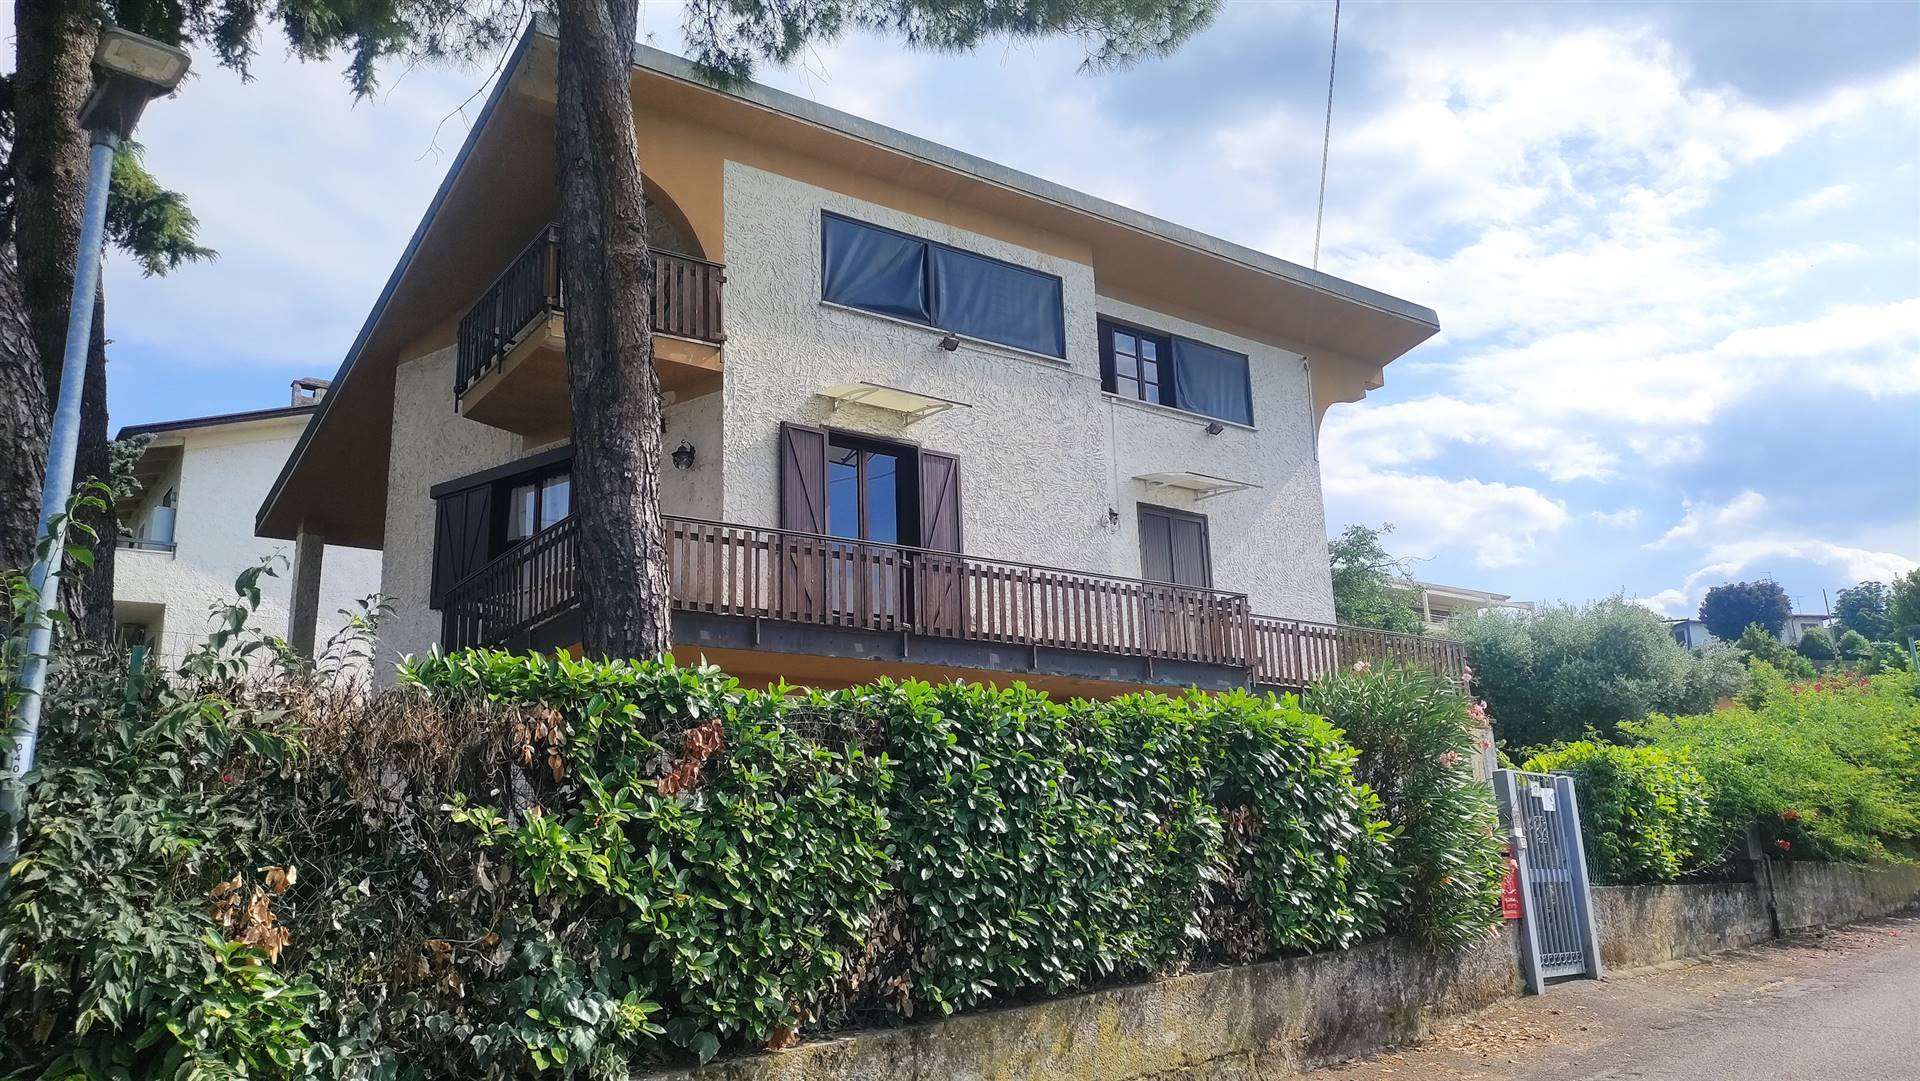 Peschiera del Garda - Boschetti - In a strategic position we offer you a villa set on a plot of 1000 sqm and arranged on three levels, two flats, one 